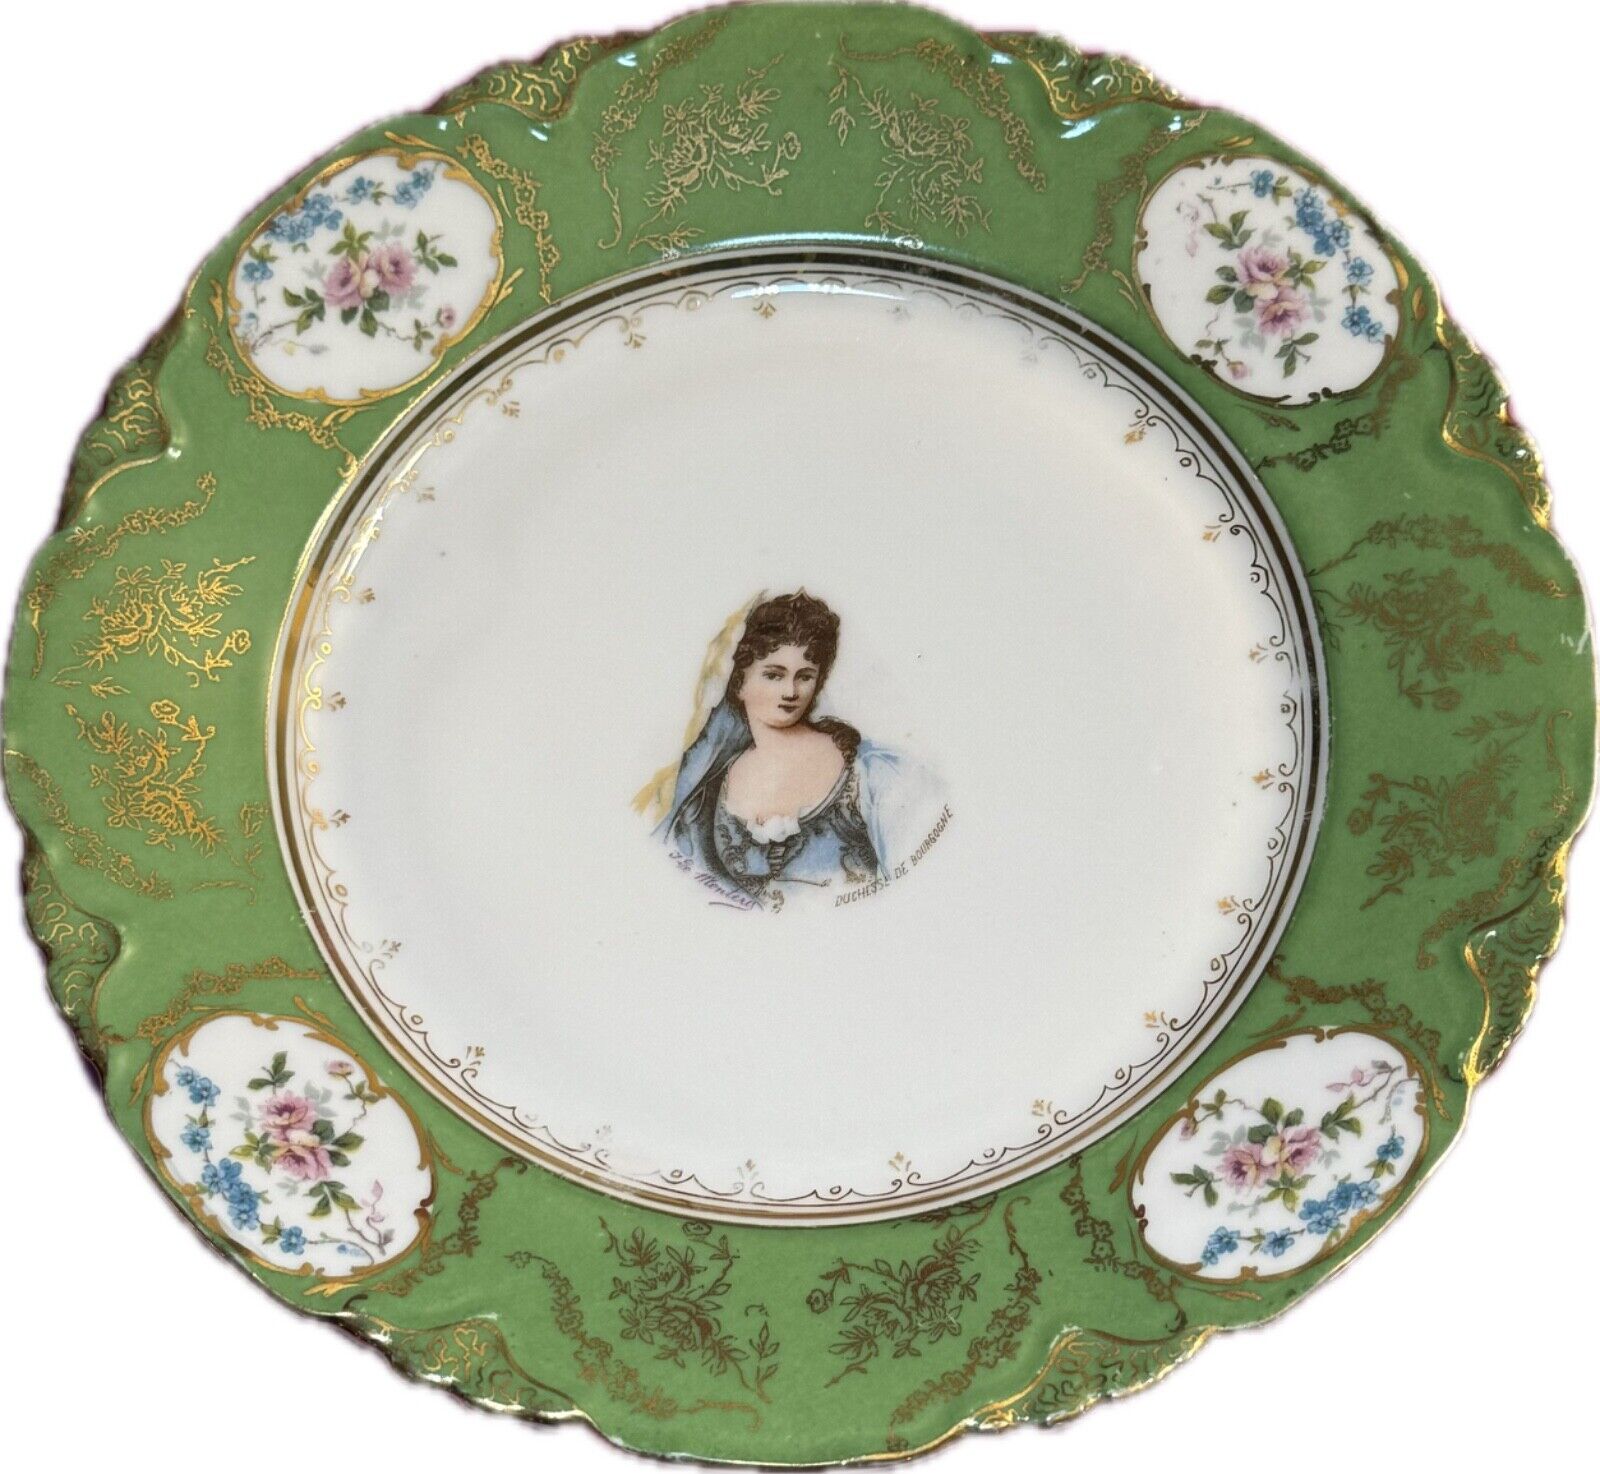 *RARE* AUSTRIAN PLATE w/DE MONTERO HAND-PAINTED LADY by KARLSBAD LS&S, EXCELLENT